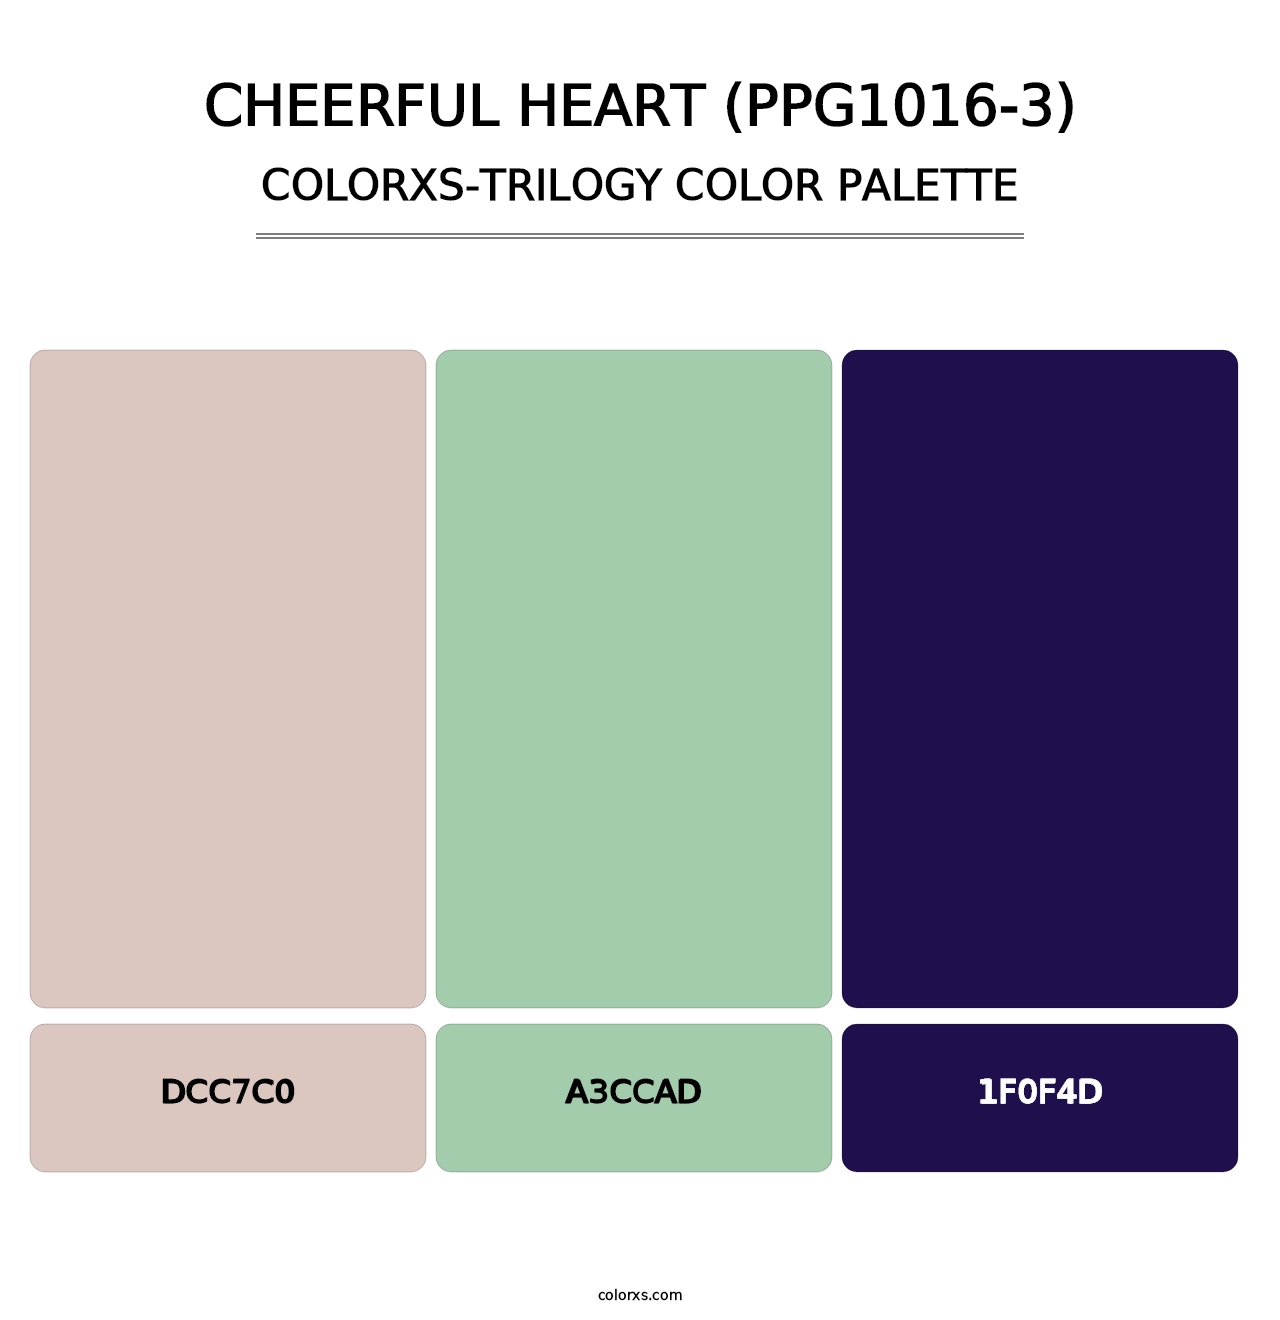 Cheerful Heart (PPG1016-3) - Colorxs Trilogy Palette